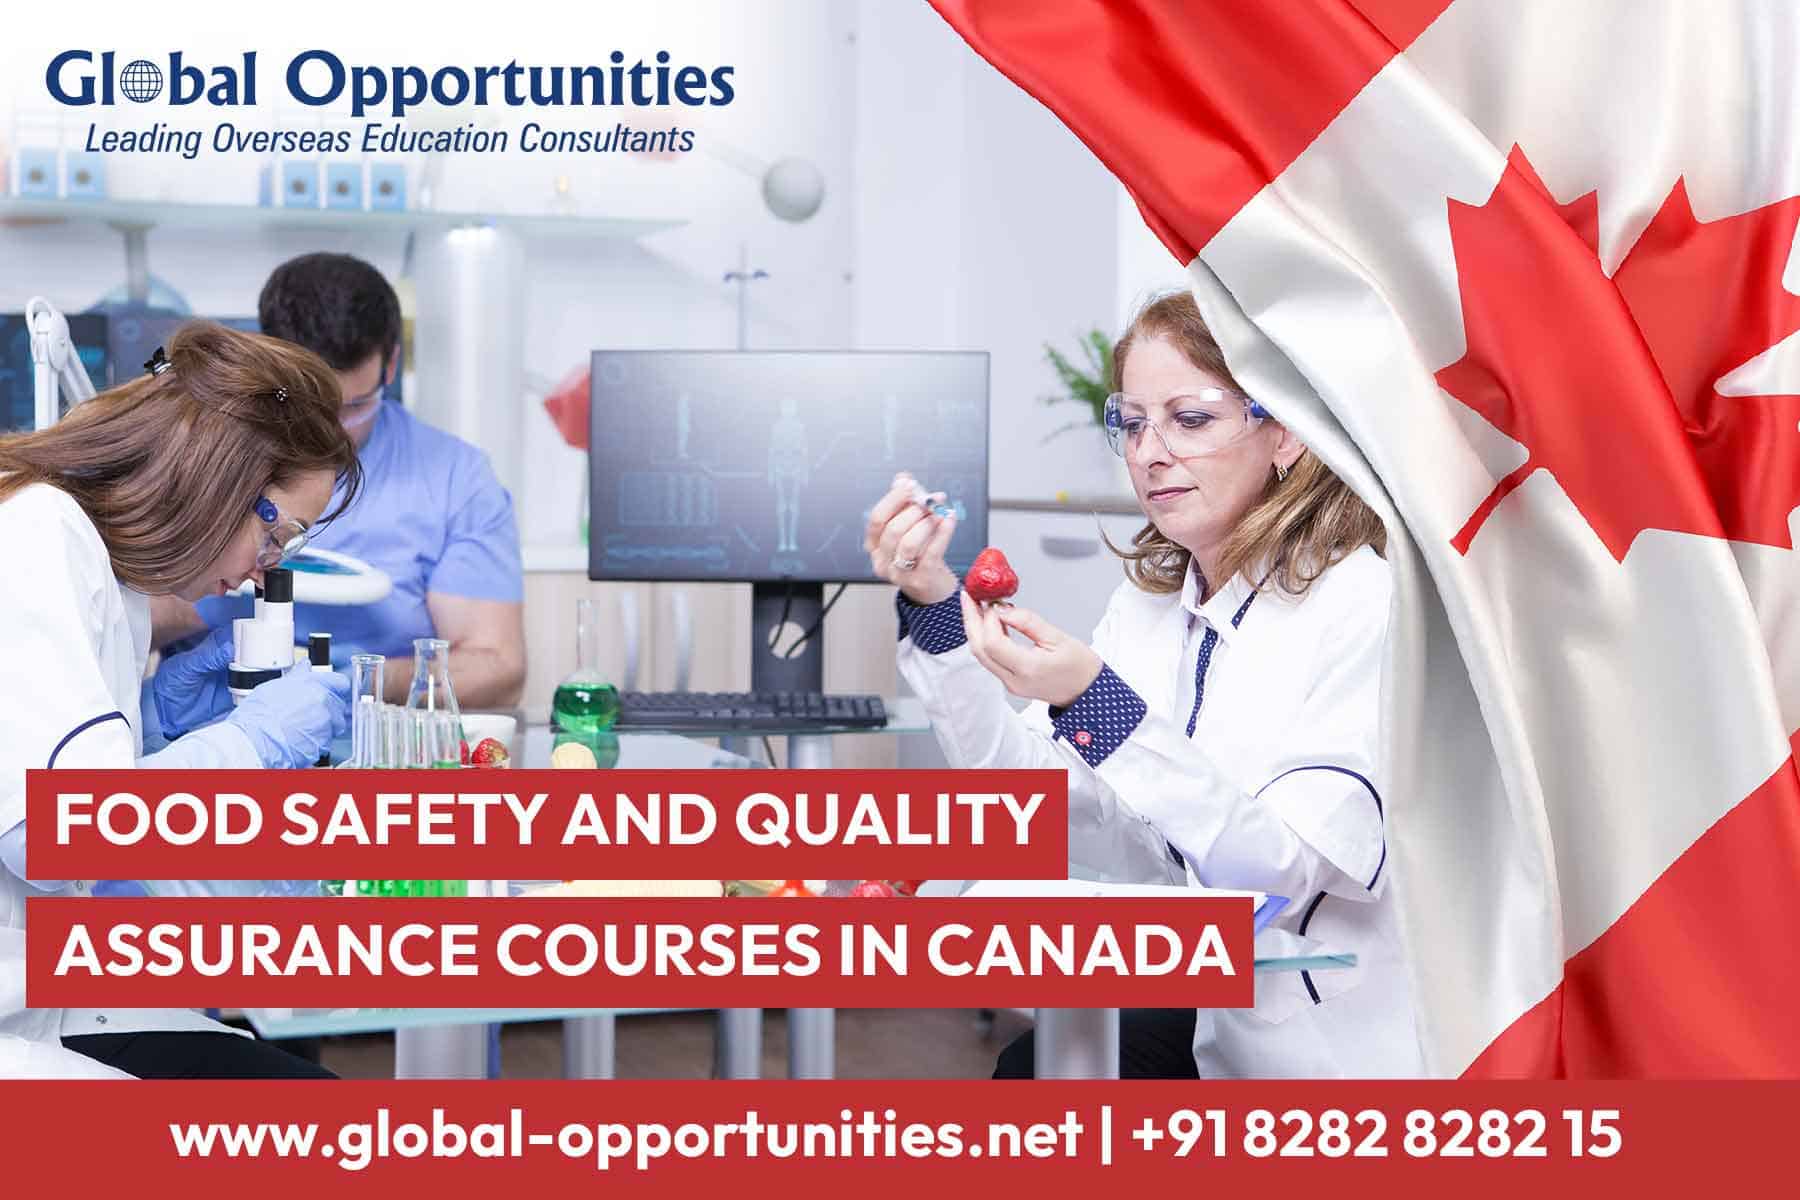 Food Safety and Quality Assurance Courses in Canada